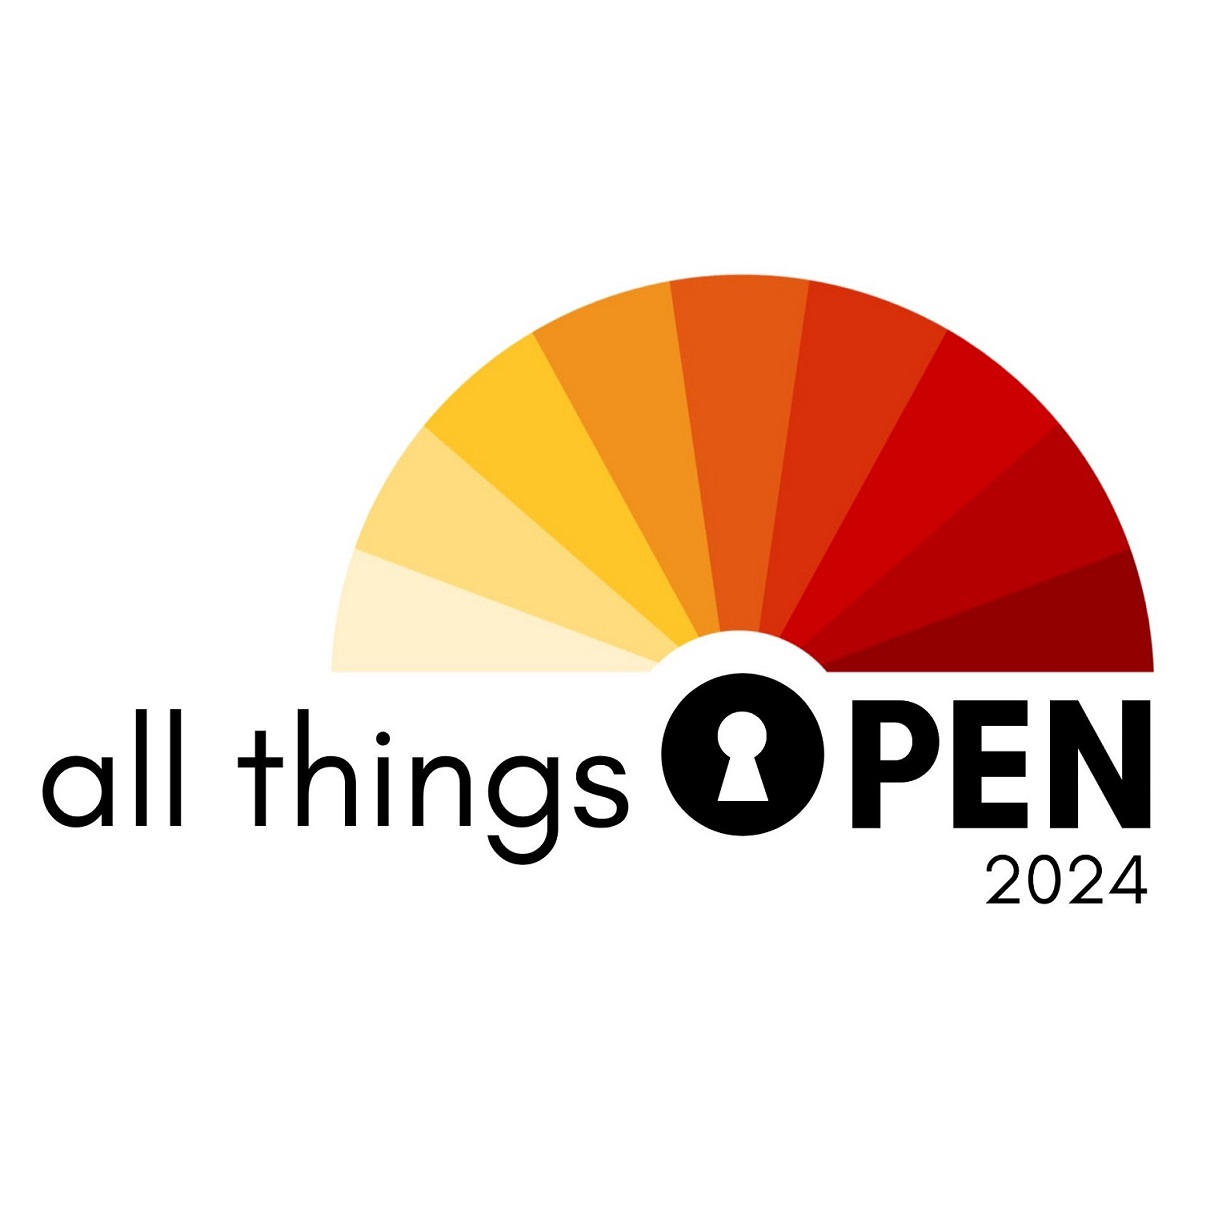 All Things Open Week: KSU Libraries Hosts a Digital Conference Exploring Open Access